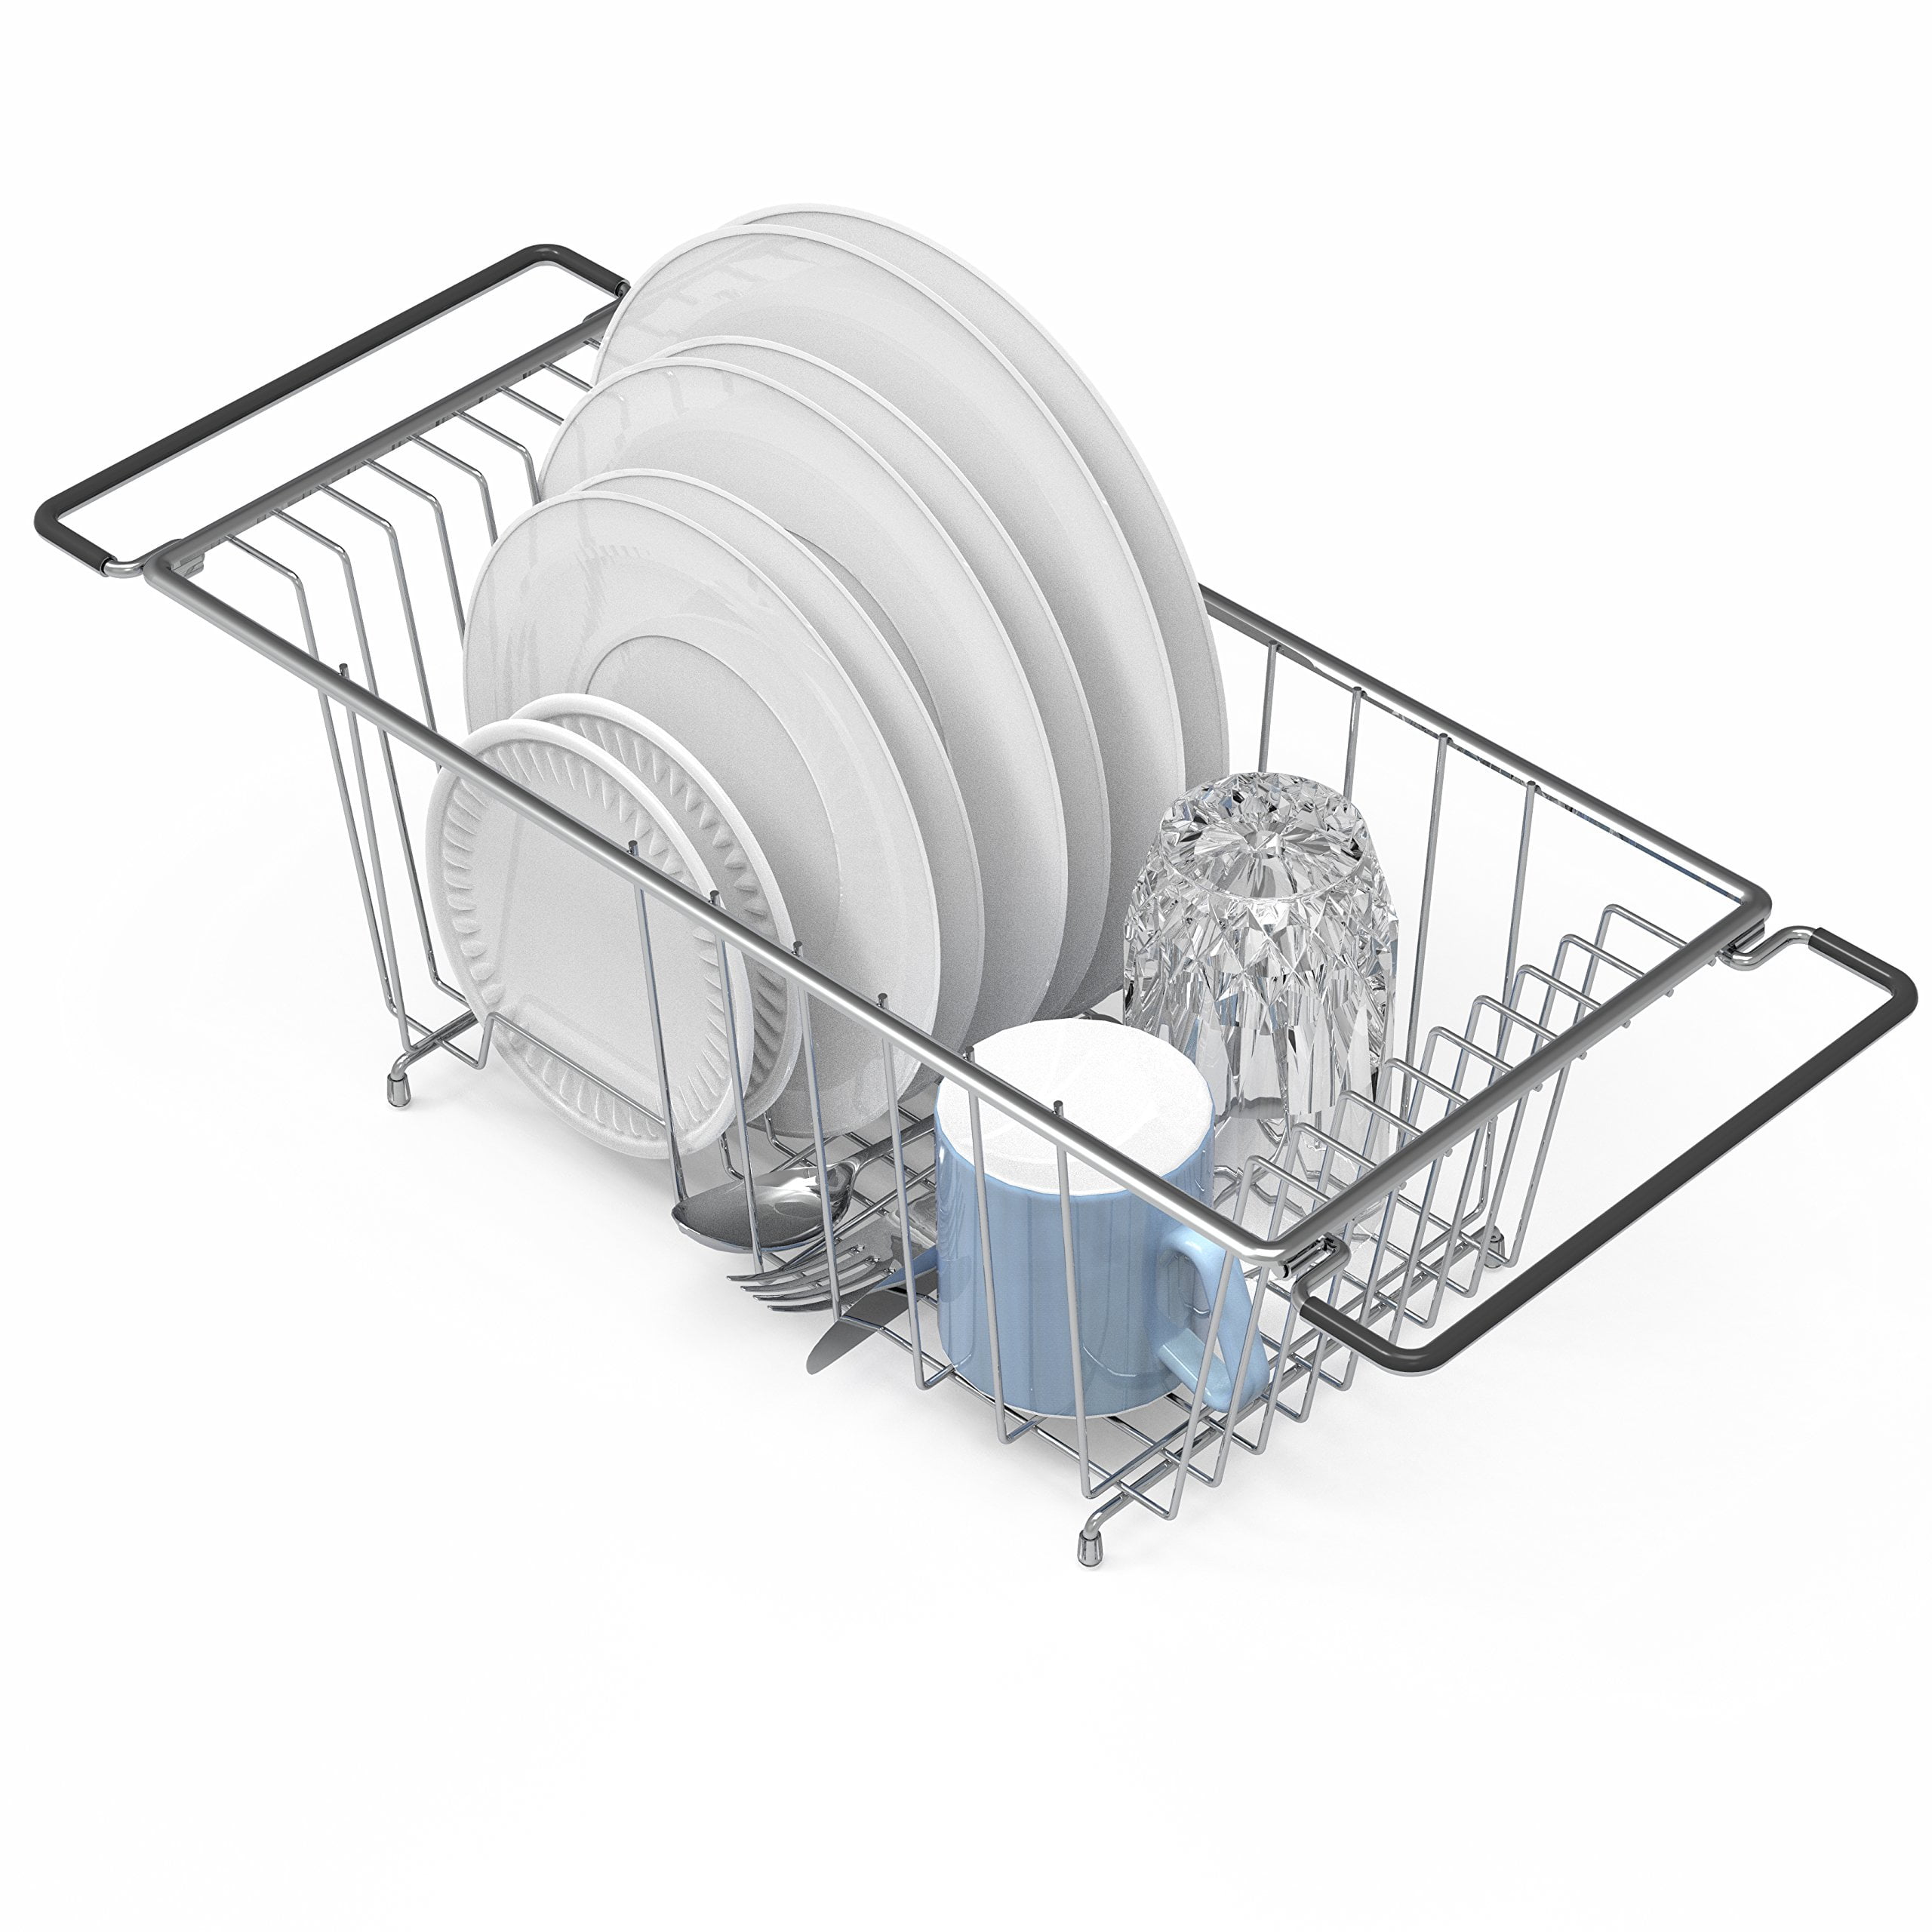 Dish-Drying Racks That Don't Hog Counter Space